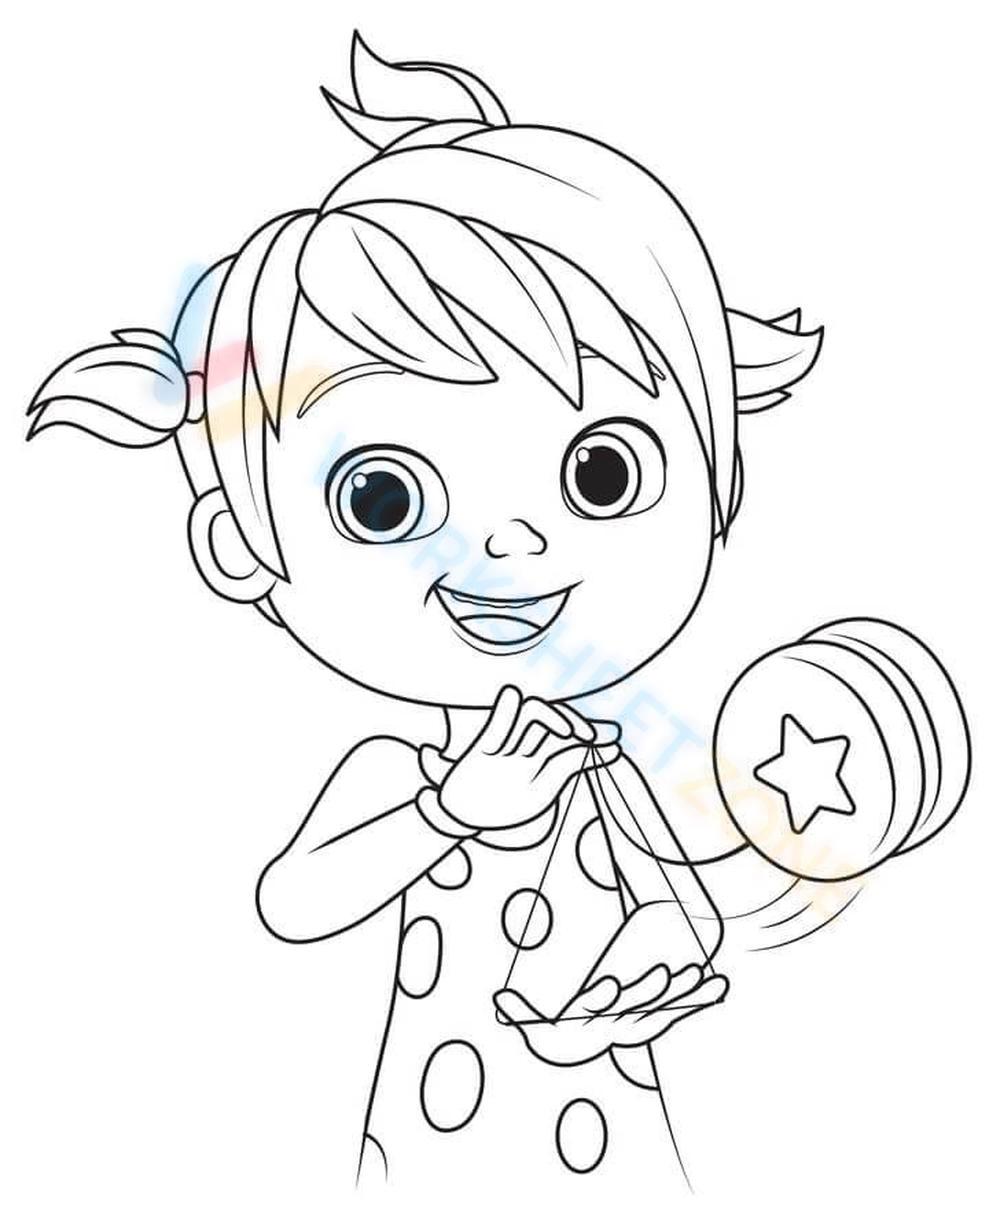 Free printable cocomelon coloring pages for kids